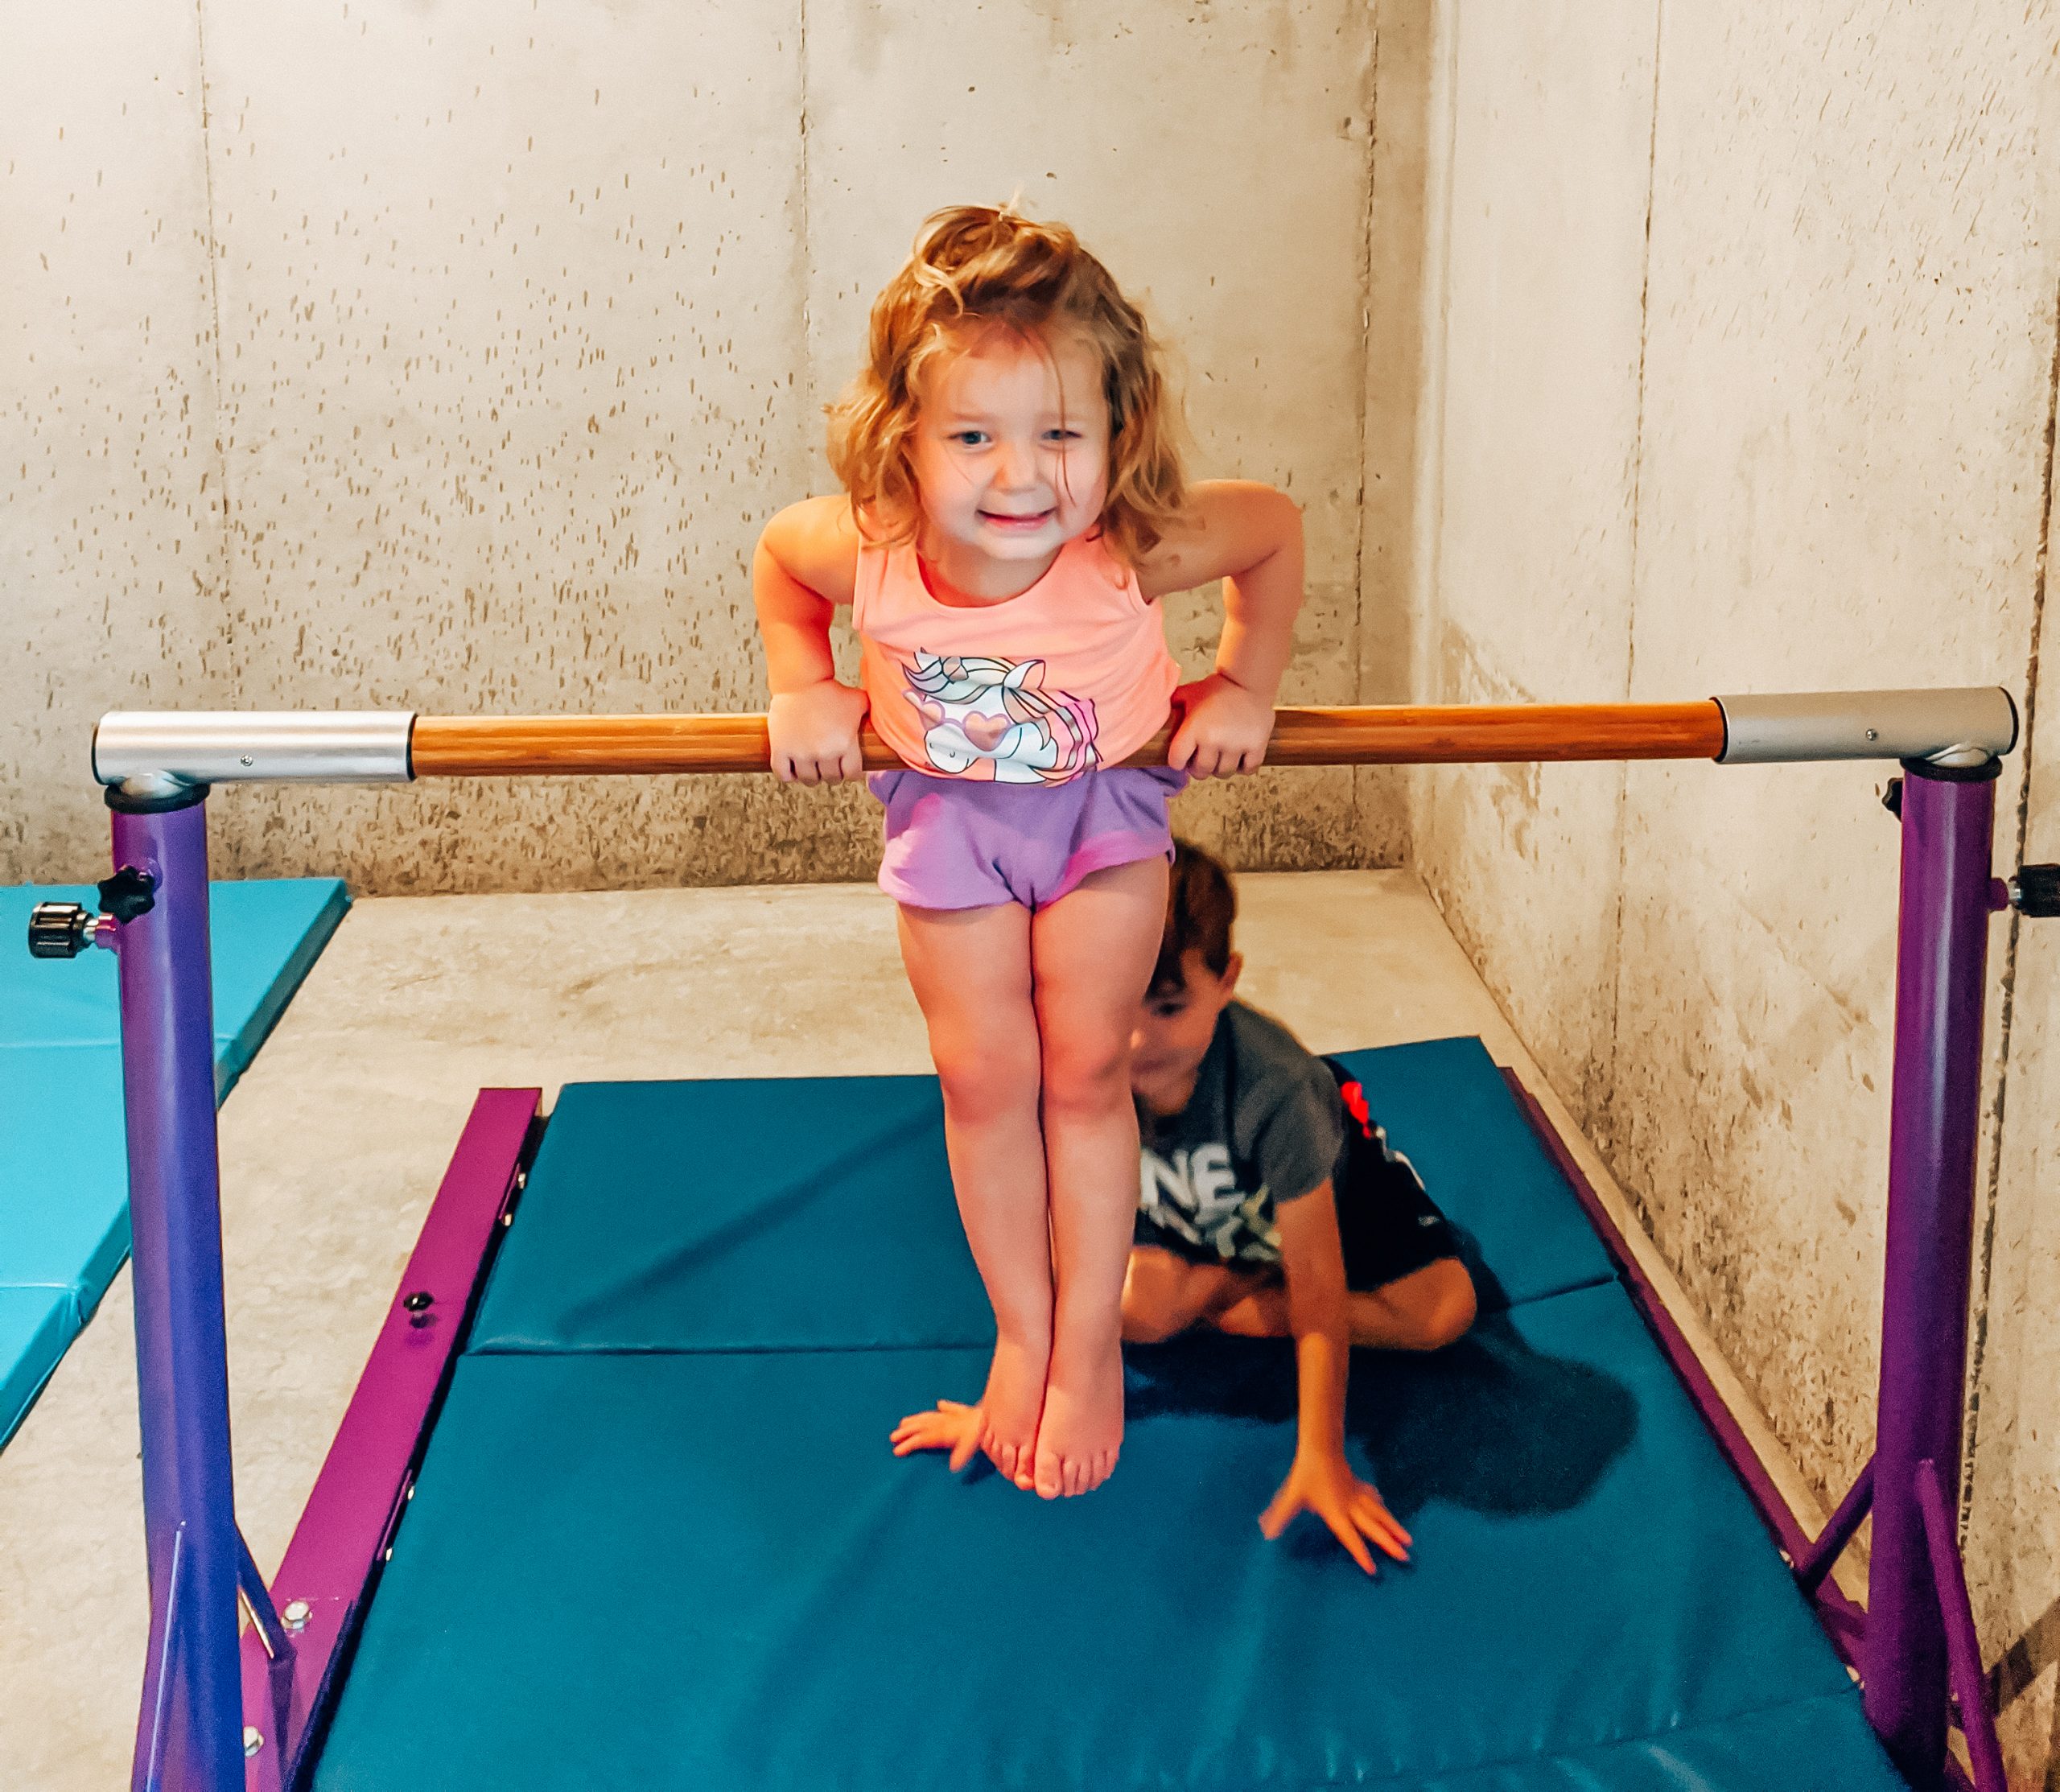 Gymnastics vs. Tumbling: Which is Right for Your Child?